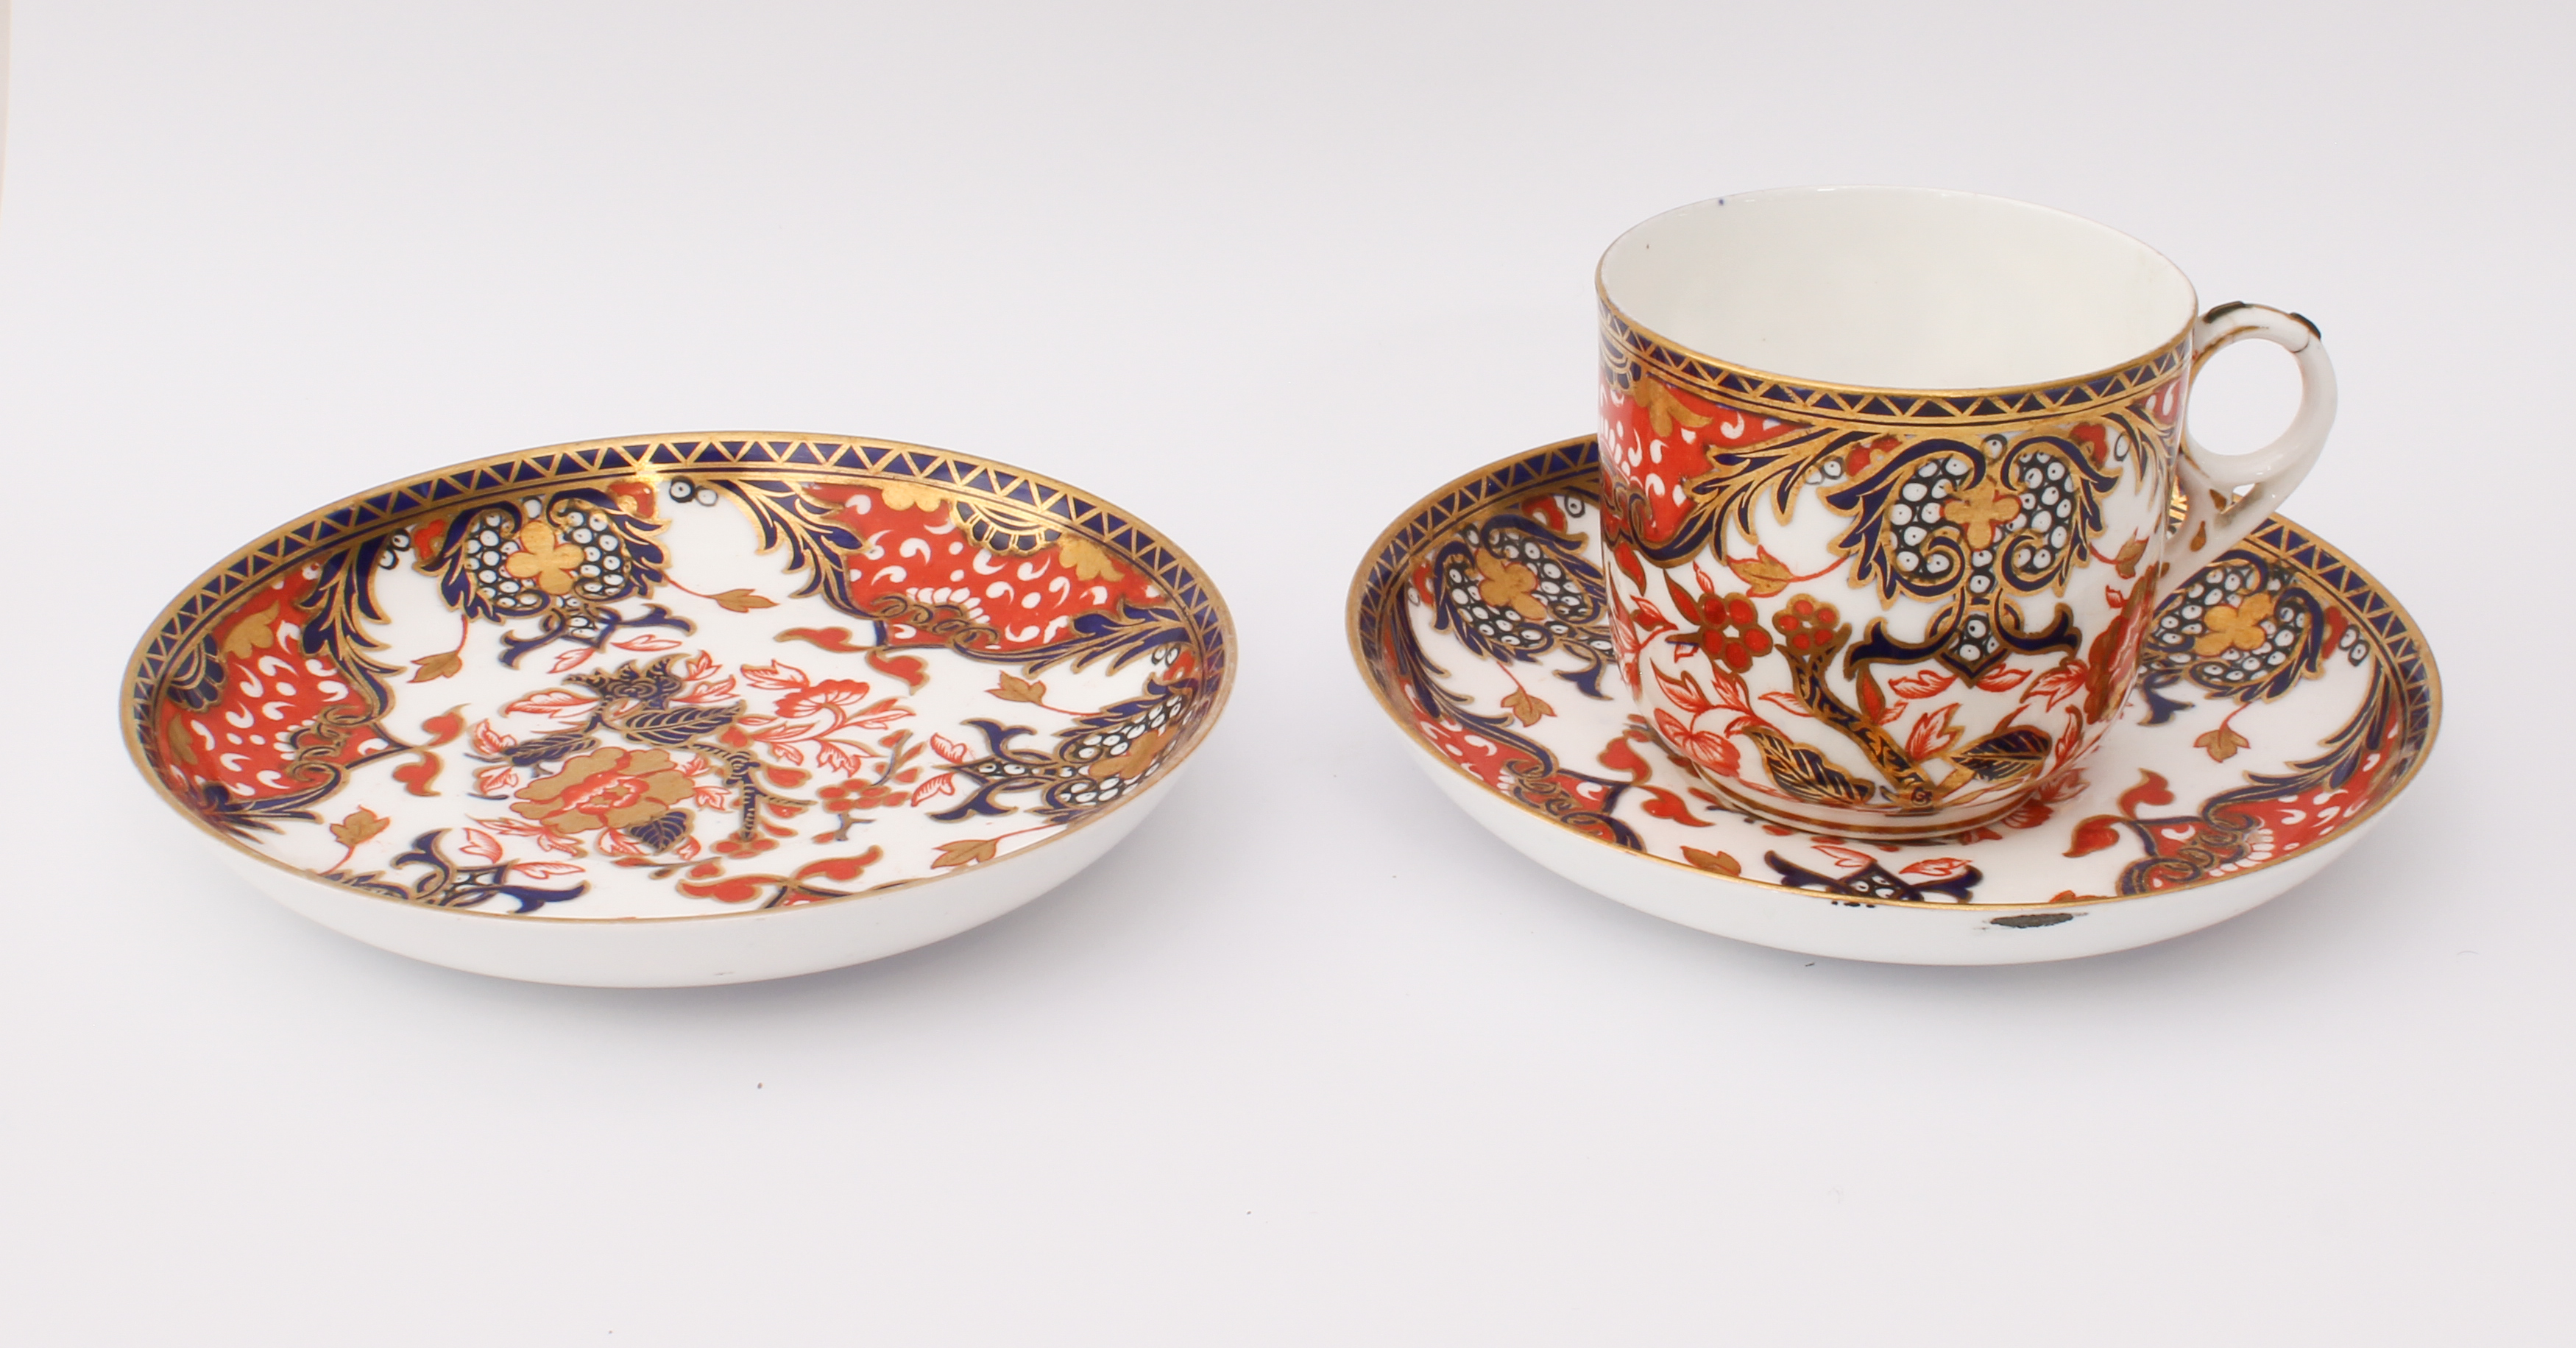 Three pieces of Royal Crown Derby king's pattern Imari bone china - early 20th century, impressed